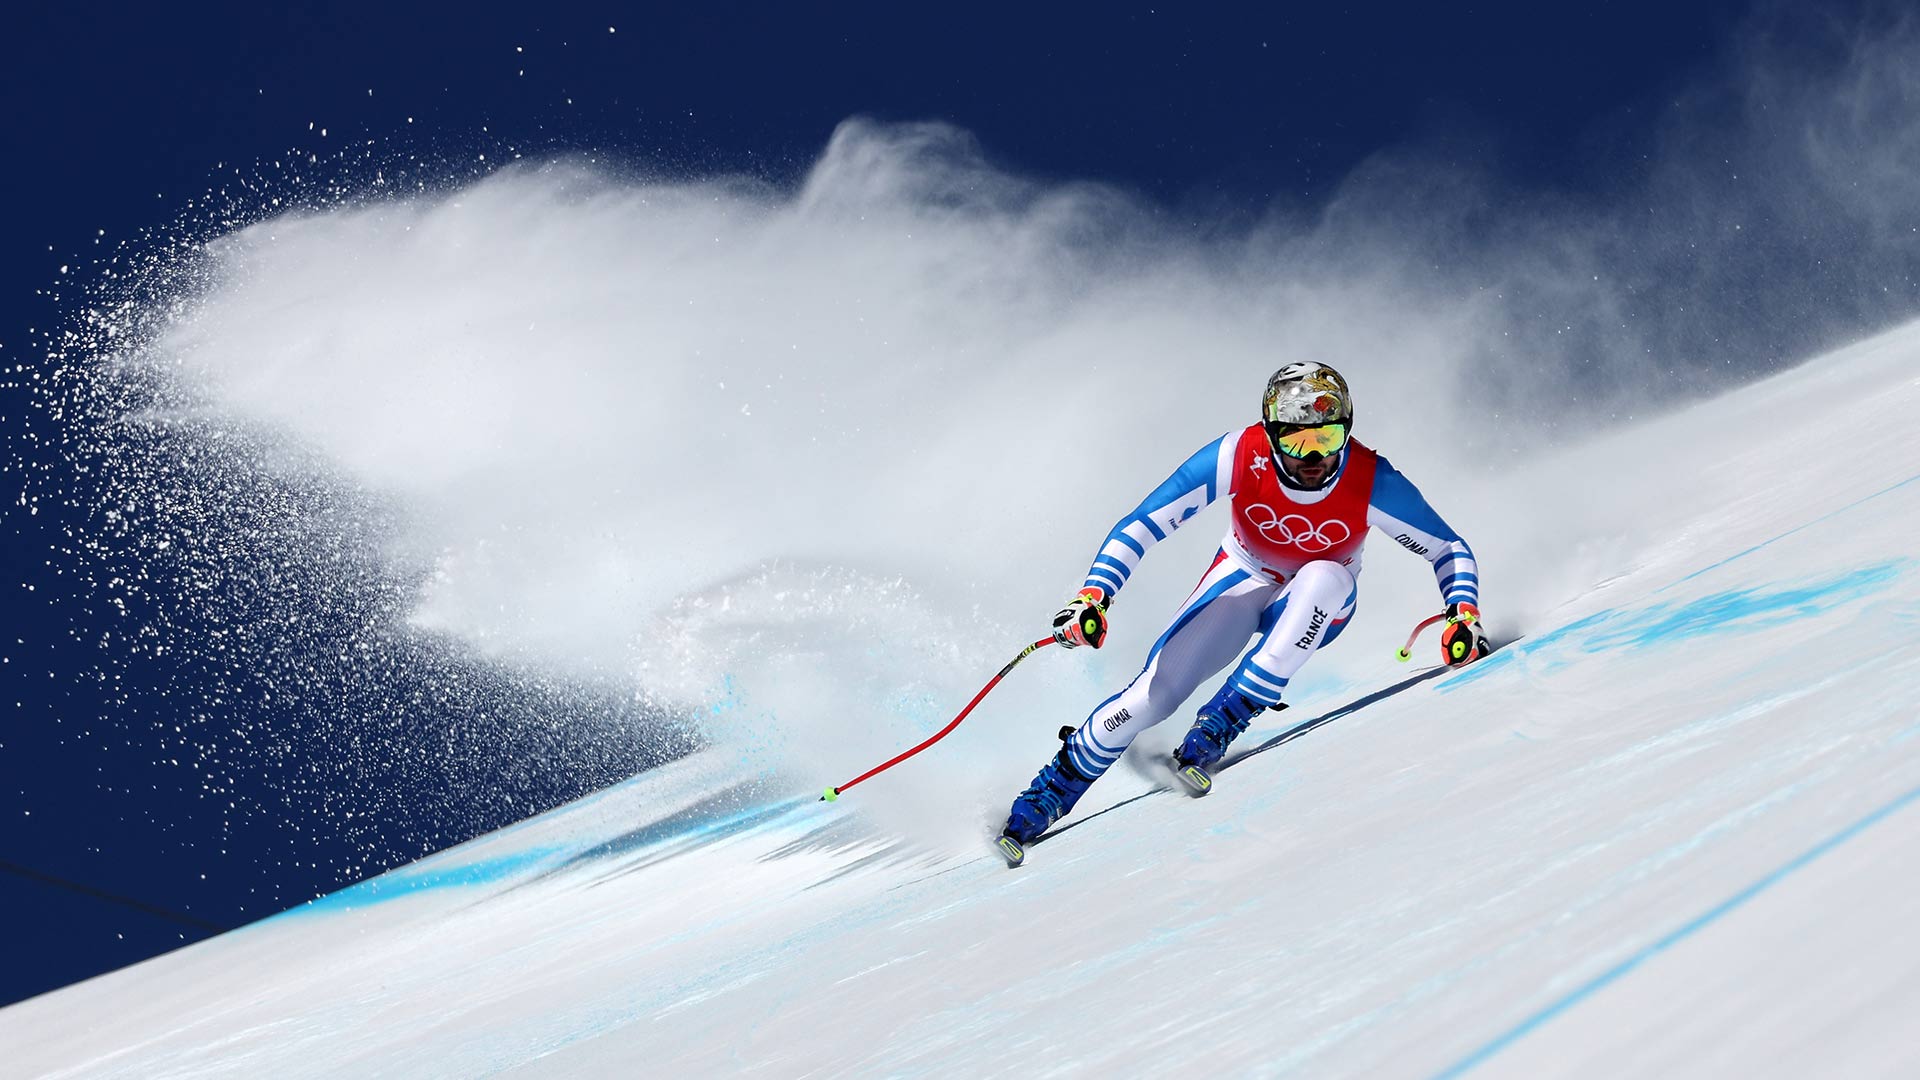 How to watch the Alpine skiing mens downhill at the 2022 Winter Olympics